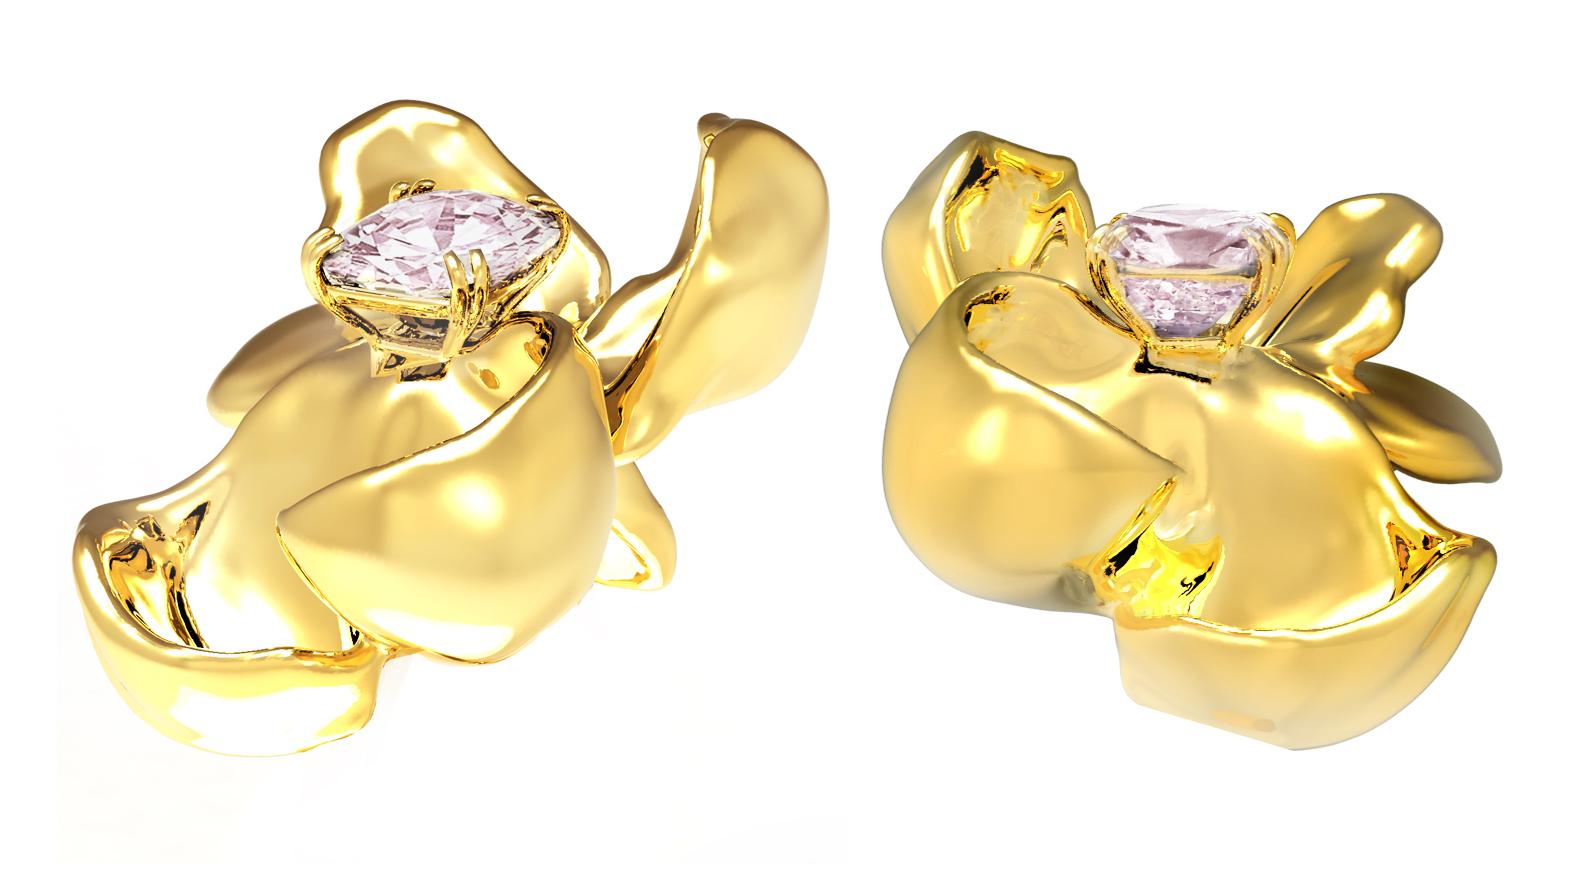 These Magnolia Flower contemporary clip-on earrings are in 18 karat yellow gold with purple cushion spinels (about 3 carats in total). The tender water-surface of the spinel multiplies the light, mirroring on the golden petals. 

The piece is